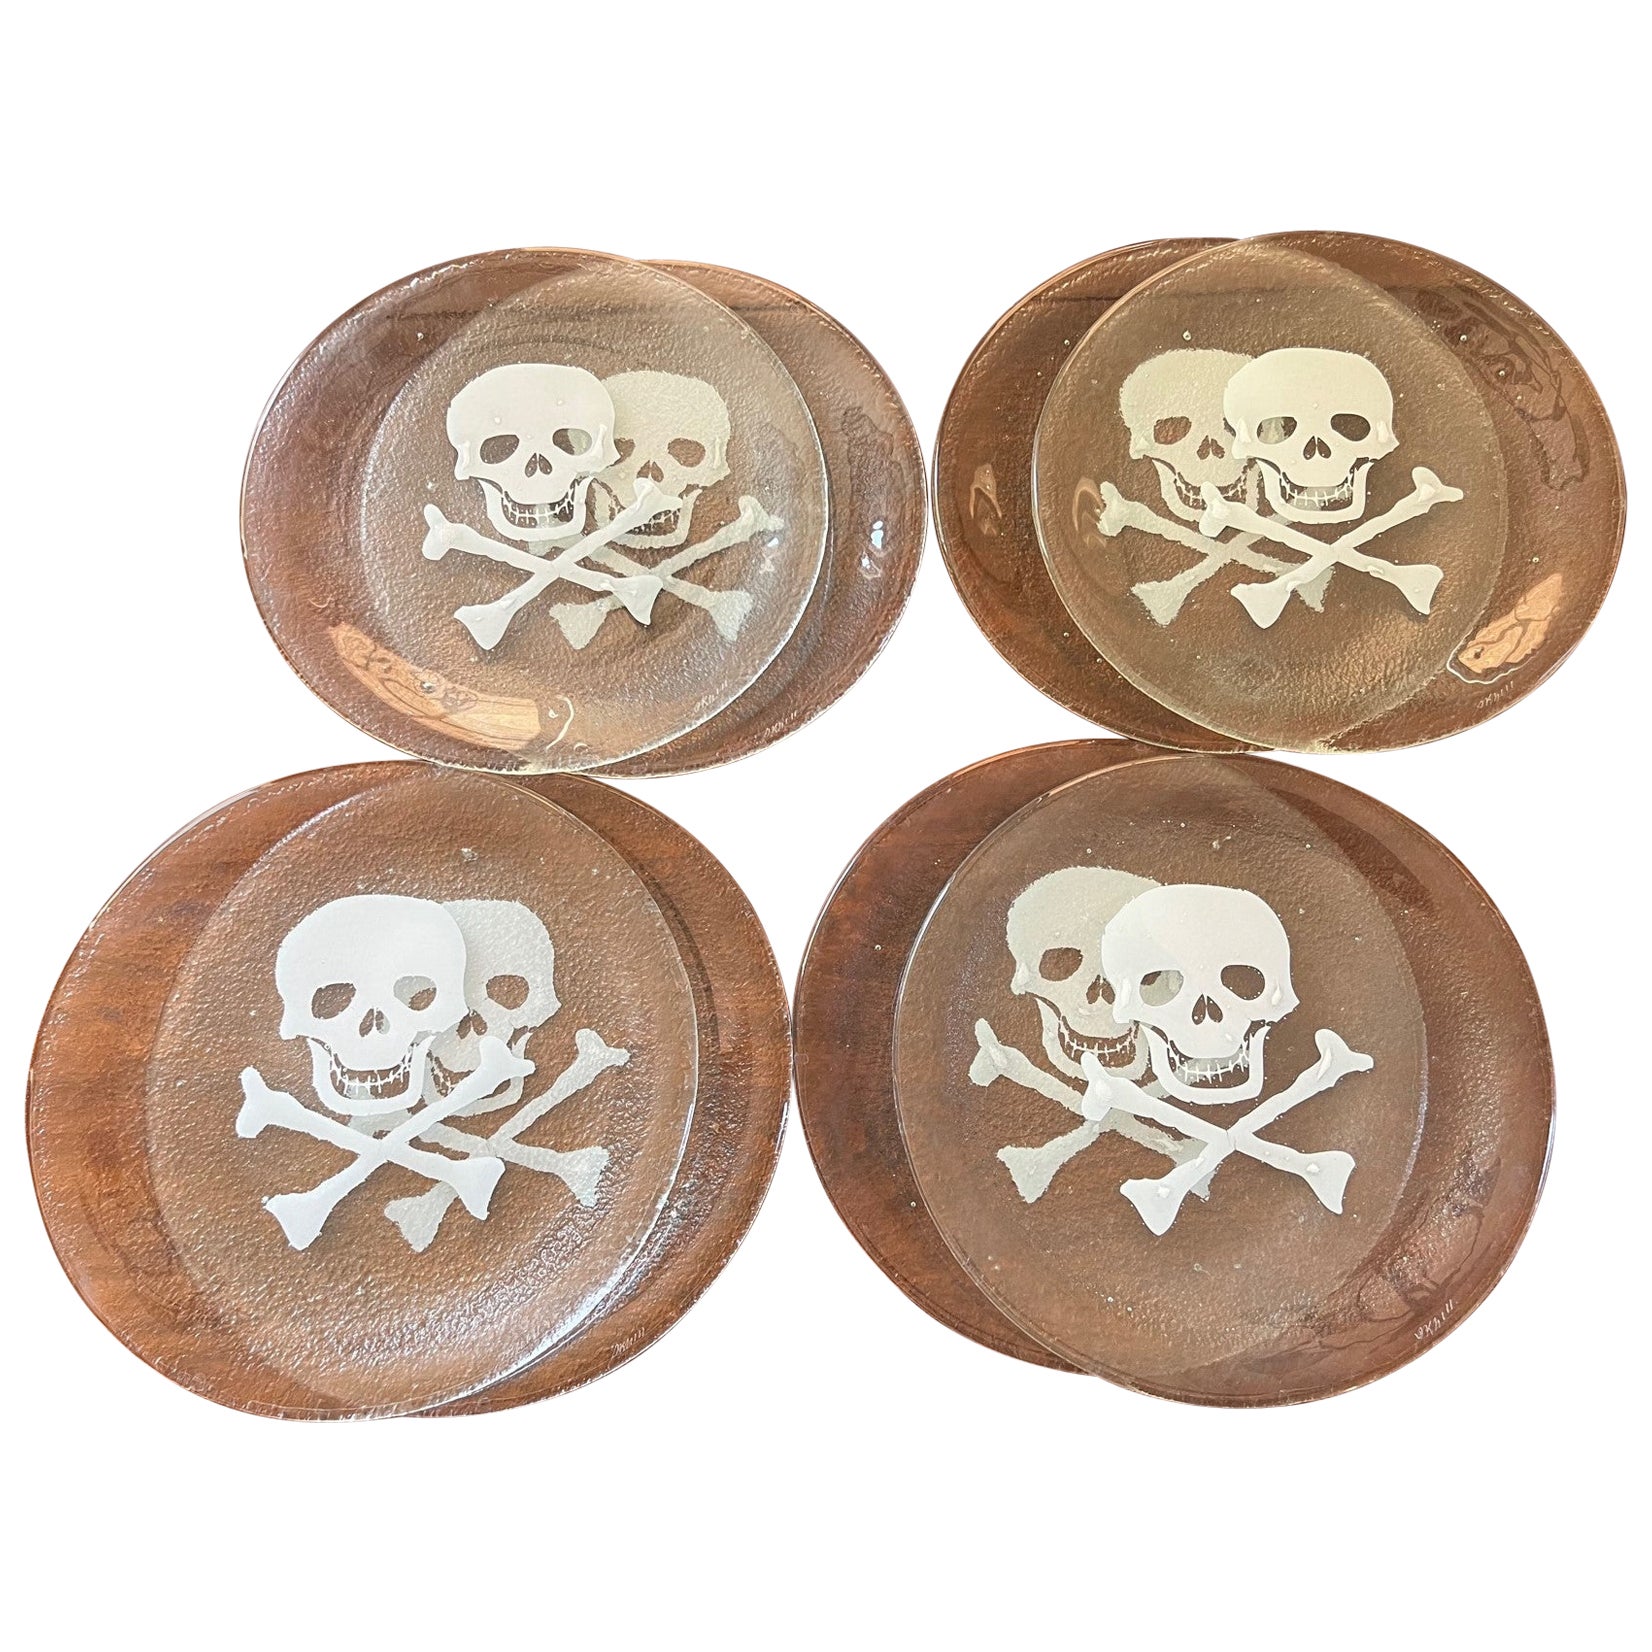 Late 20th C. Set of 8 Seeded Glass Dinner Plates with White Skull and Crossbones